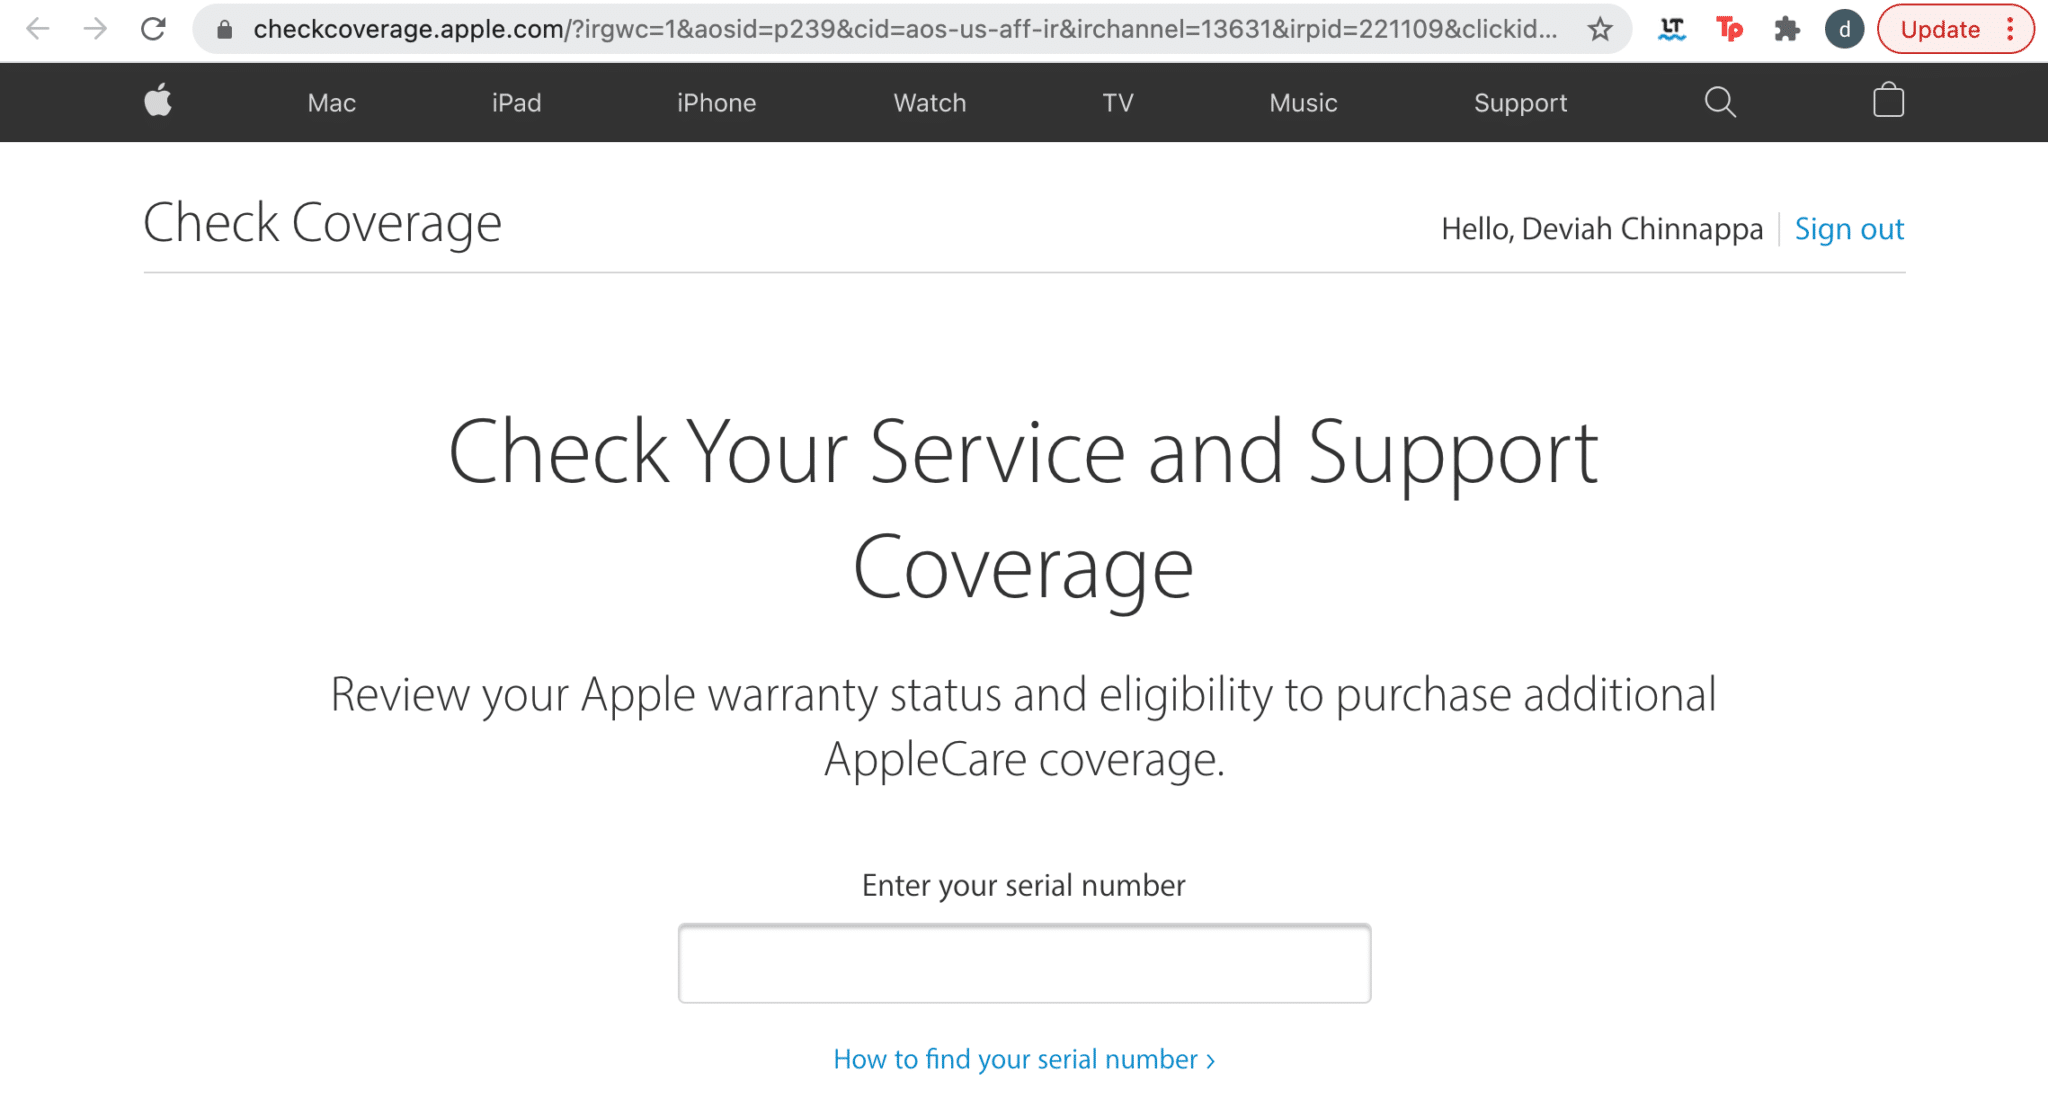 Enter the Serial number of the Apple device. Apple service and support coverage